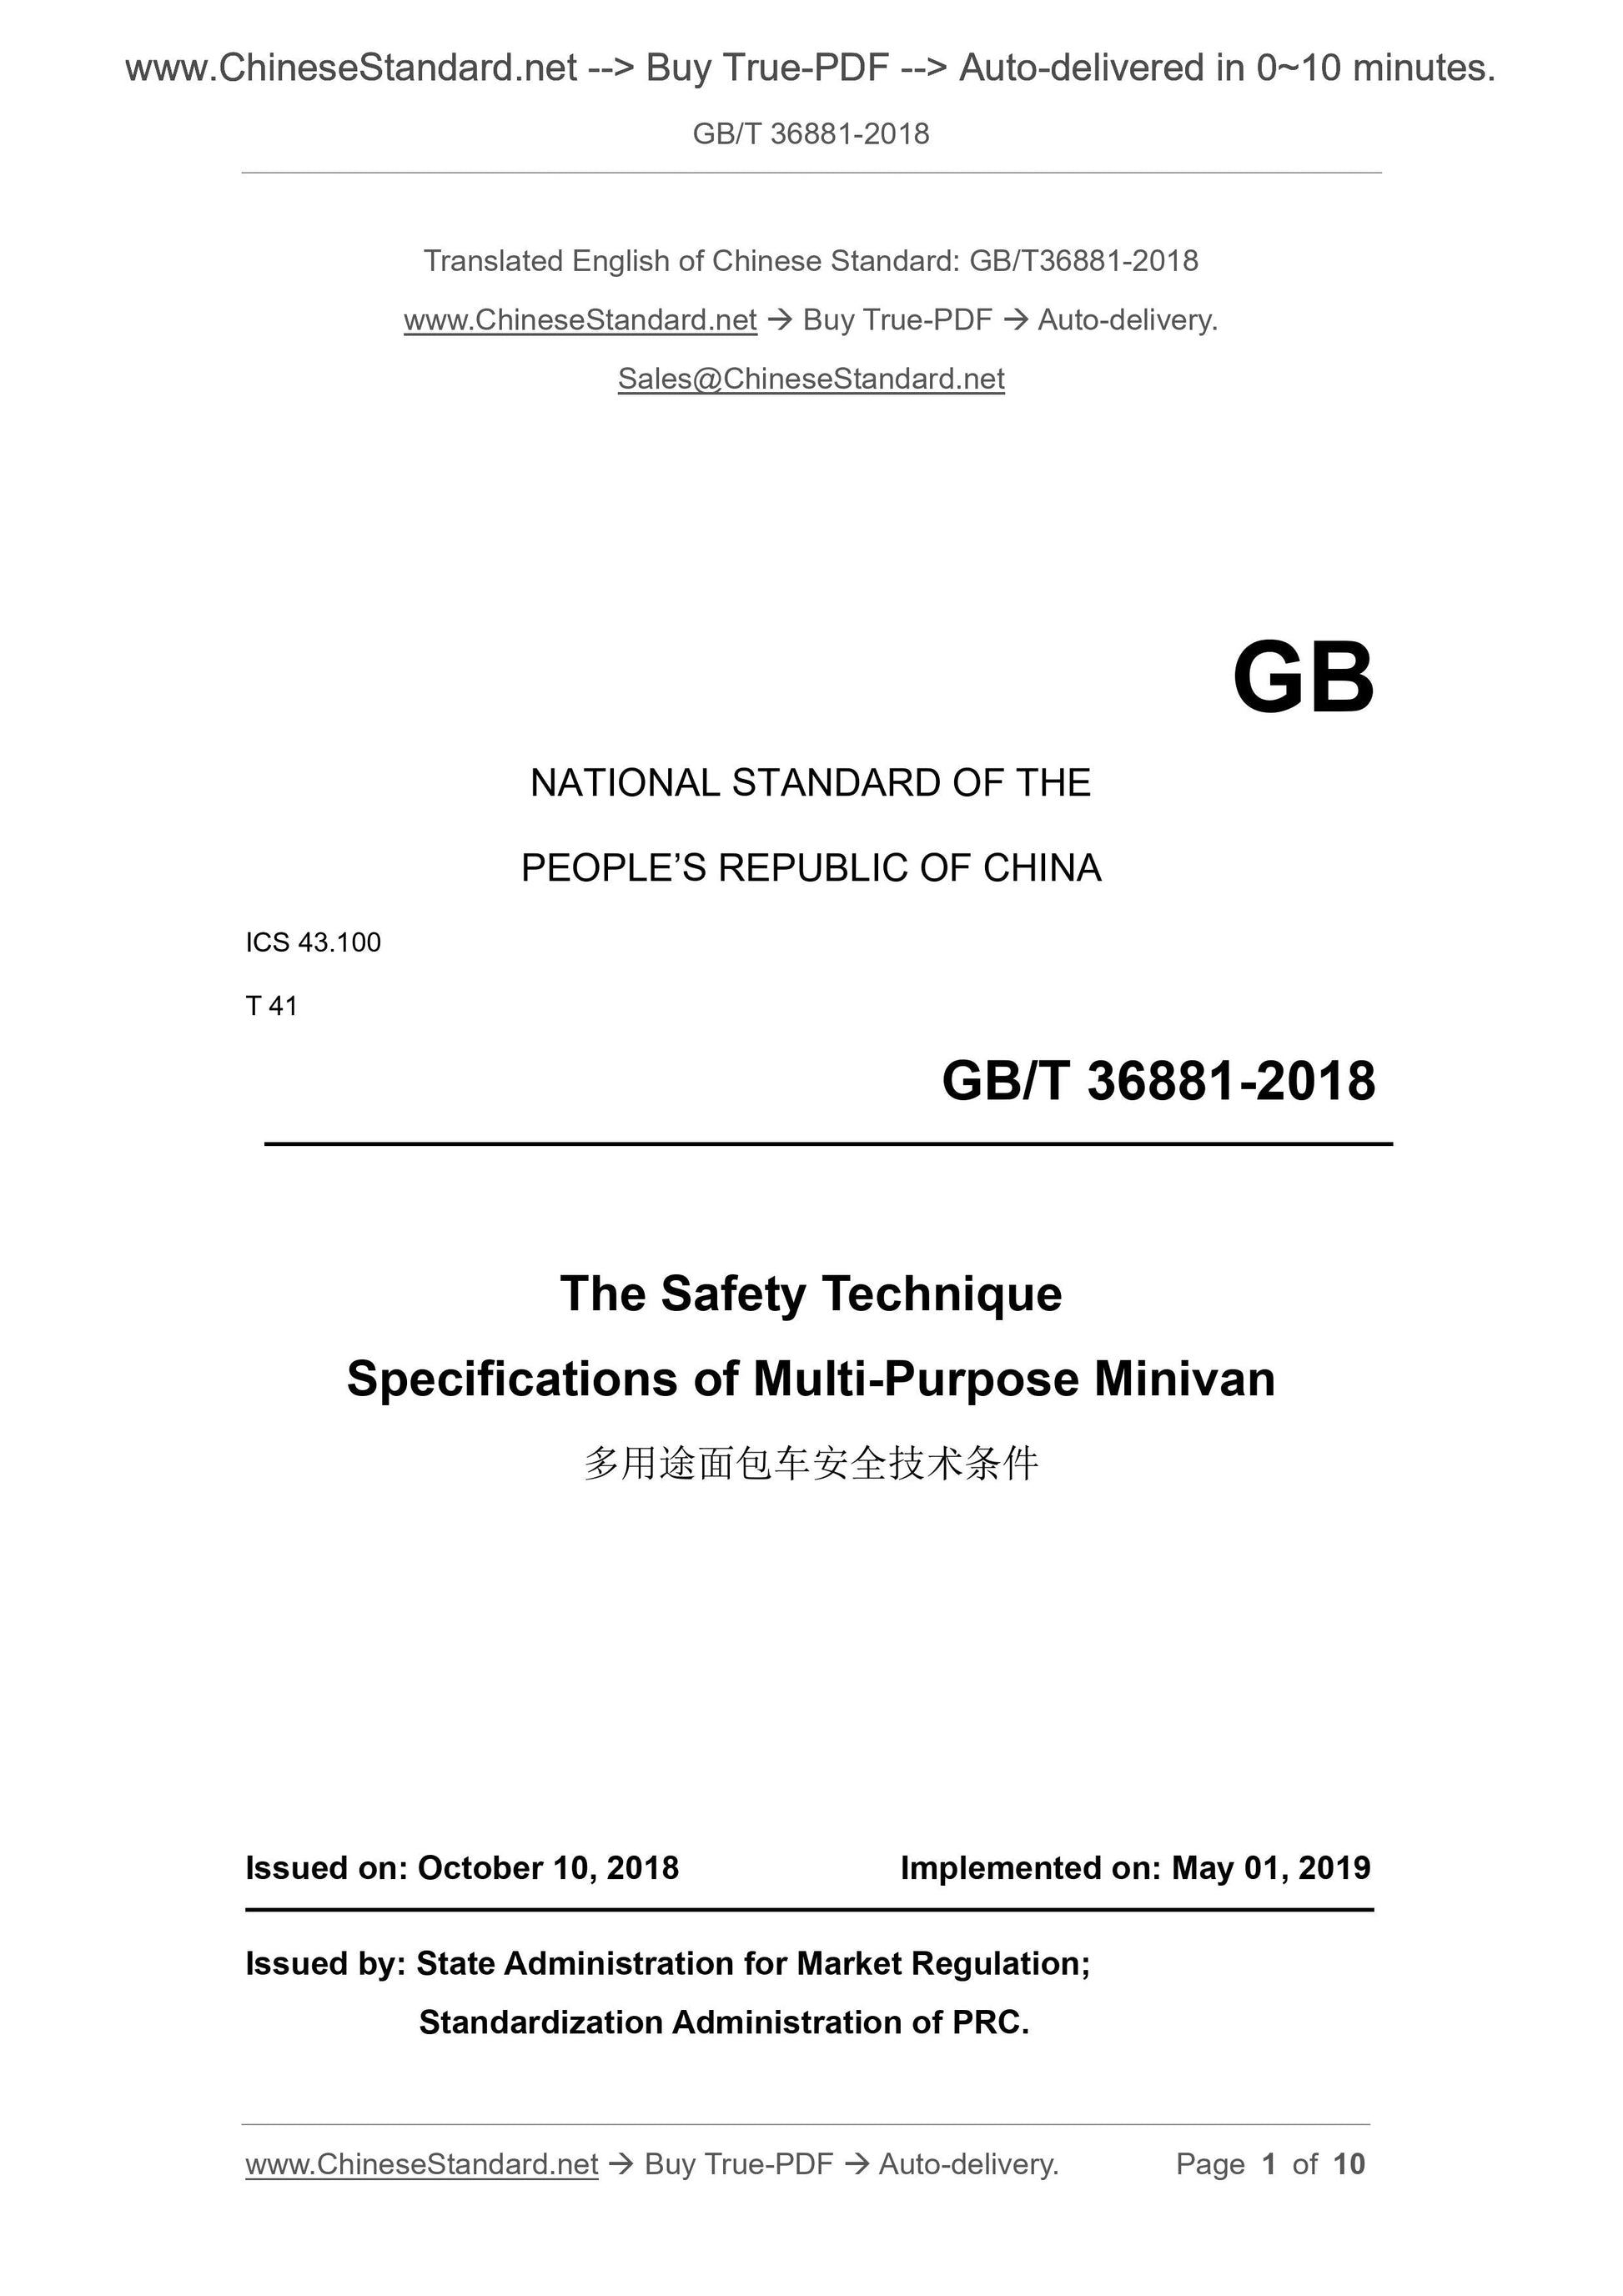 GB/T 36881-2018 Page 1